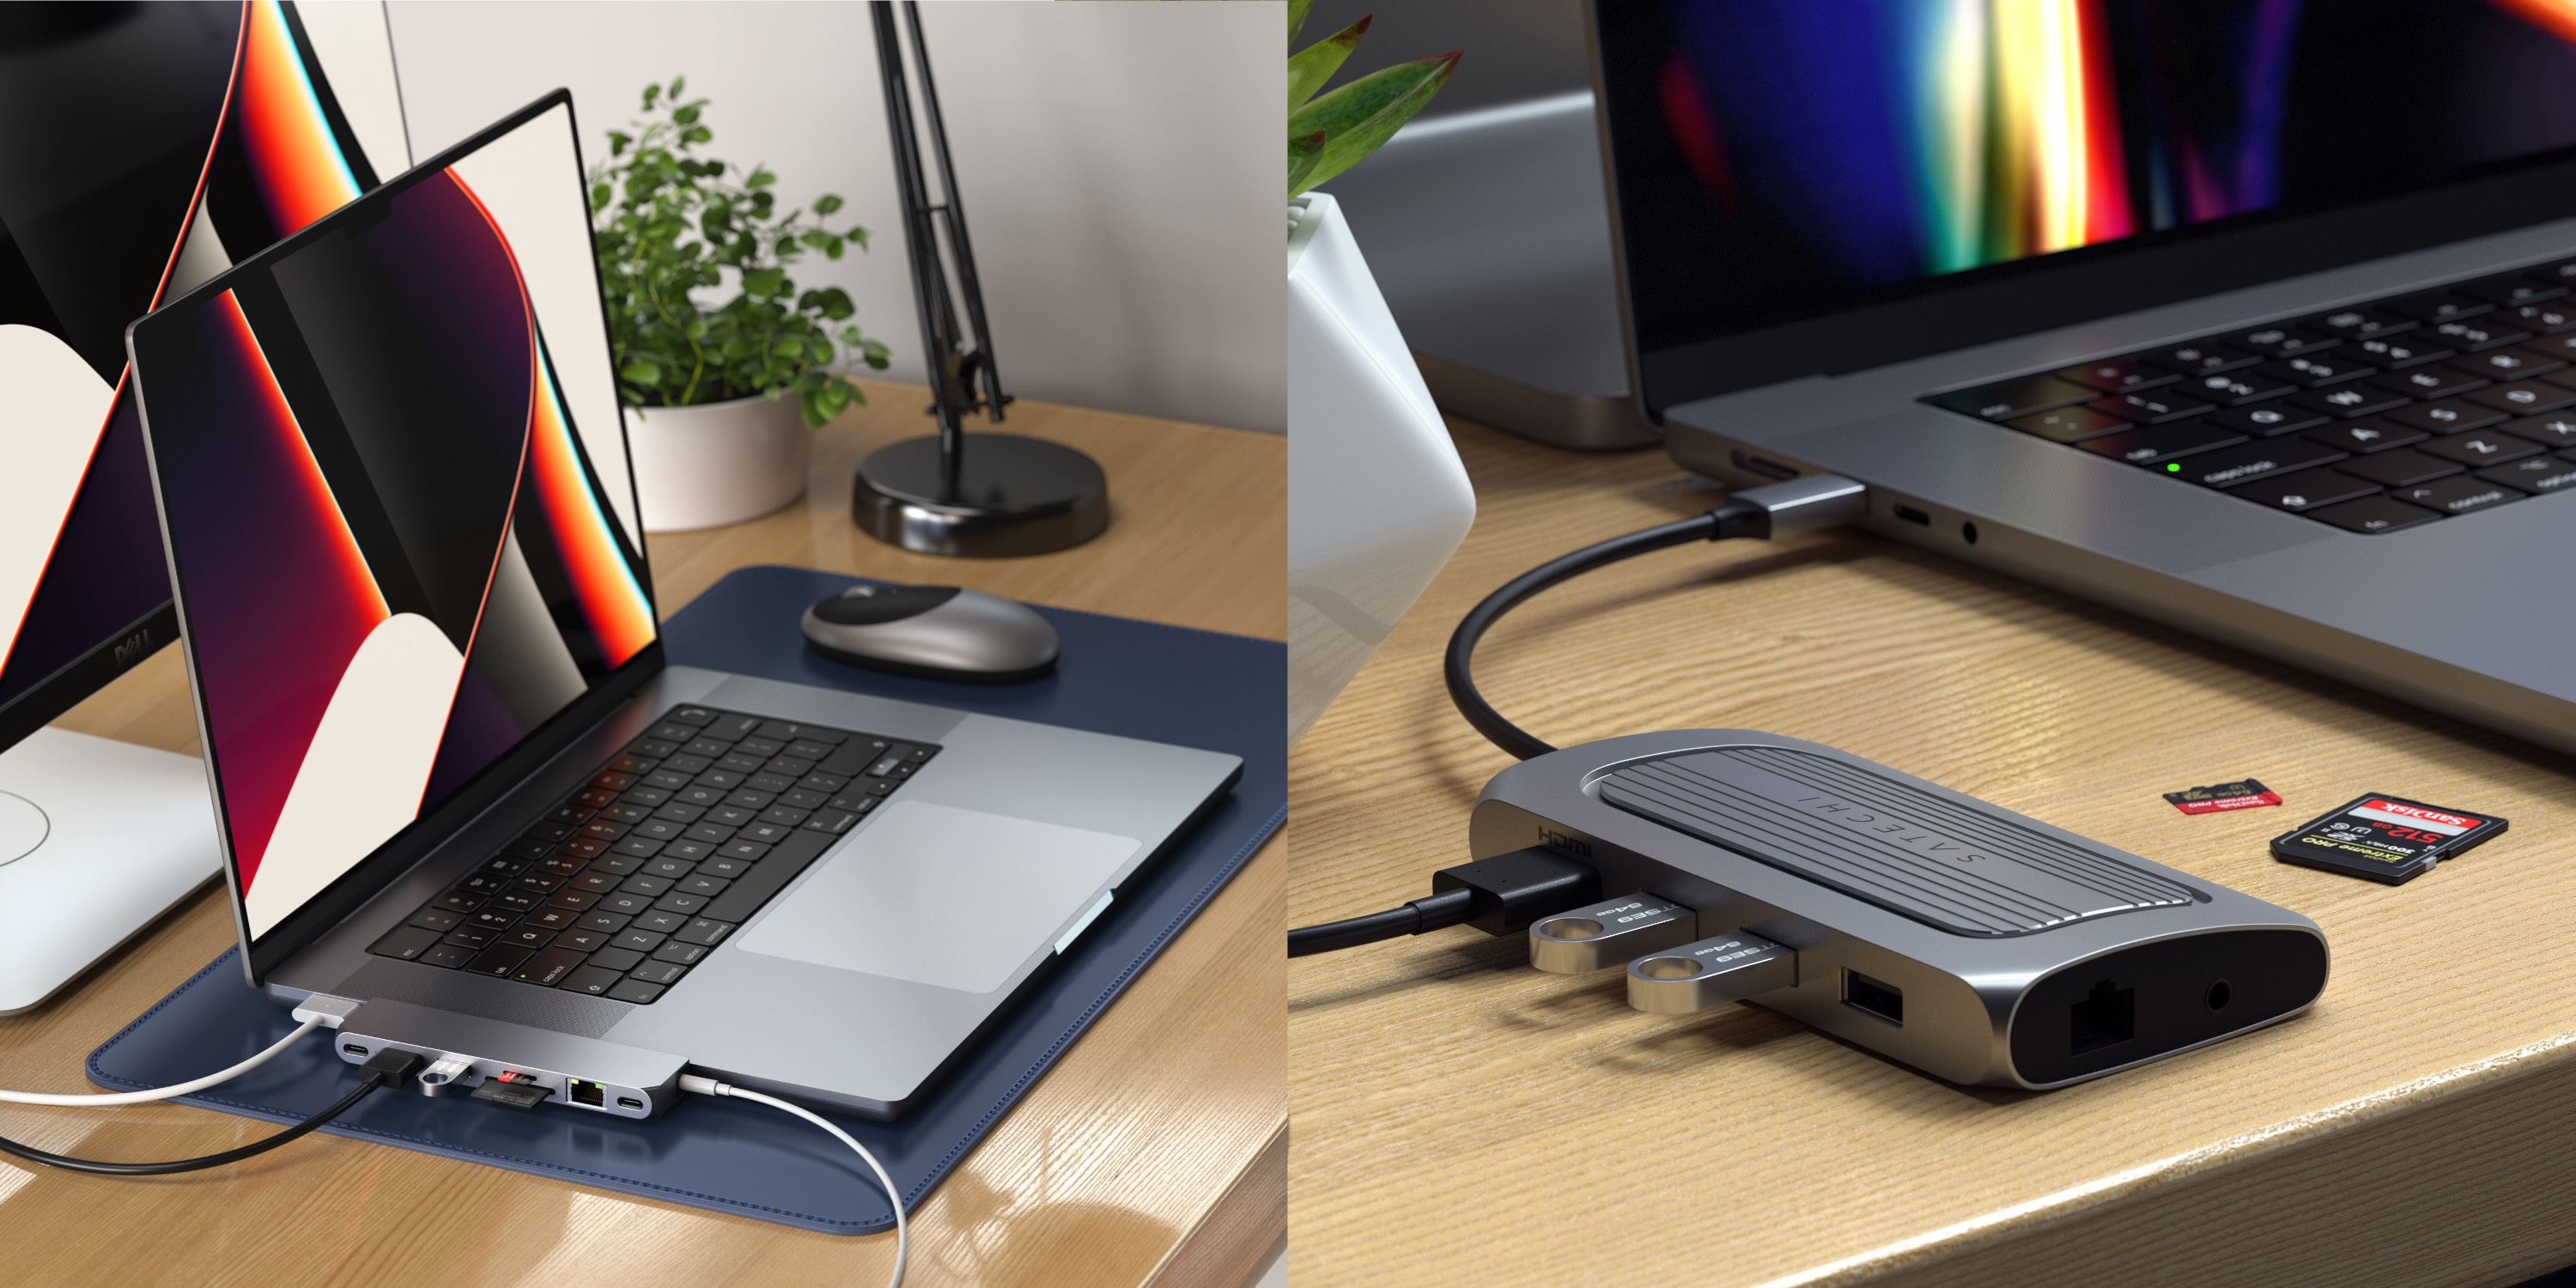 Satechi unveils USB-C Multiport Adapter with 8K support and Pro